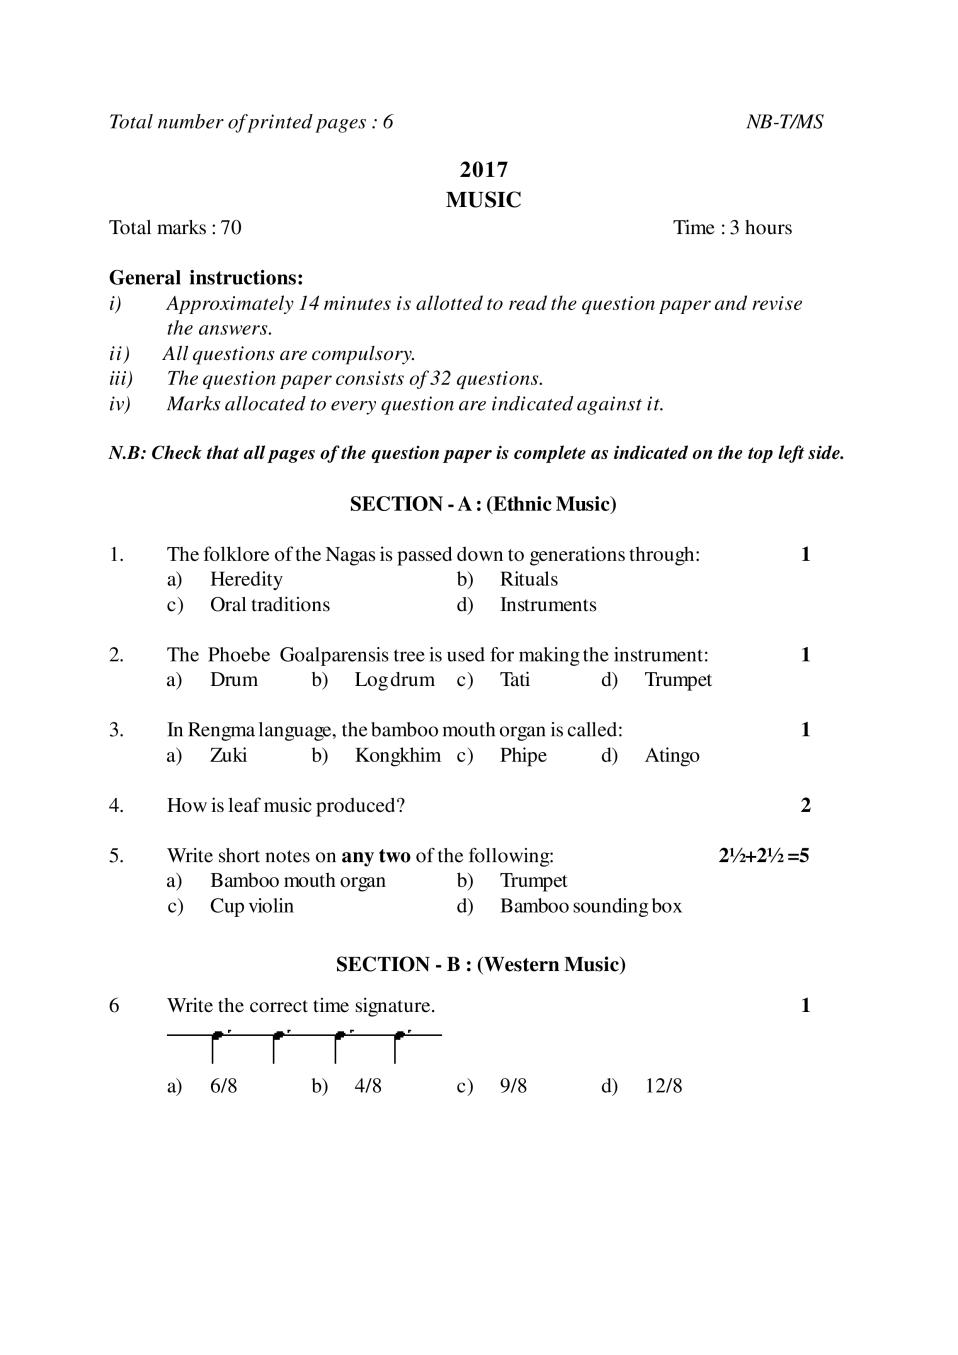 NBSE Class 10 Question Paper 2017 for Music - Page 1